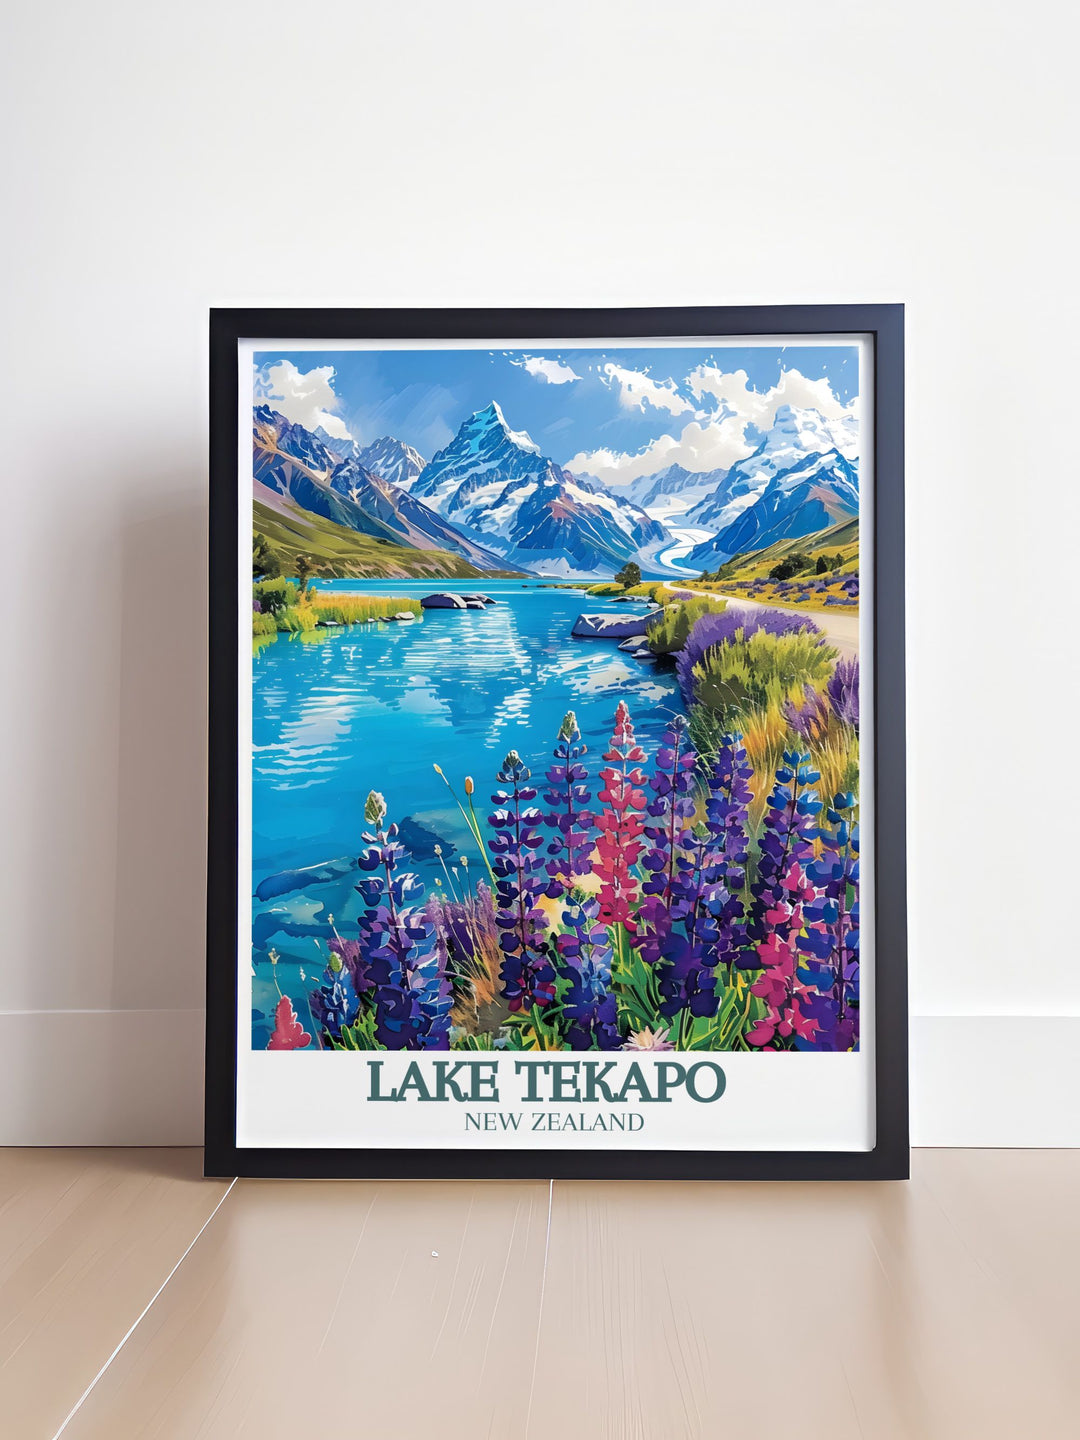 The dynamic energy of Lake Tekapo, known for its vibrant turquoise waters, is highlighted in this travel poster. Ideal for urban enthusiasts and nature lovers, this piece captures the lively spirit of one of New Zealands most famous lakes.